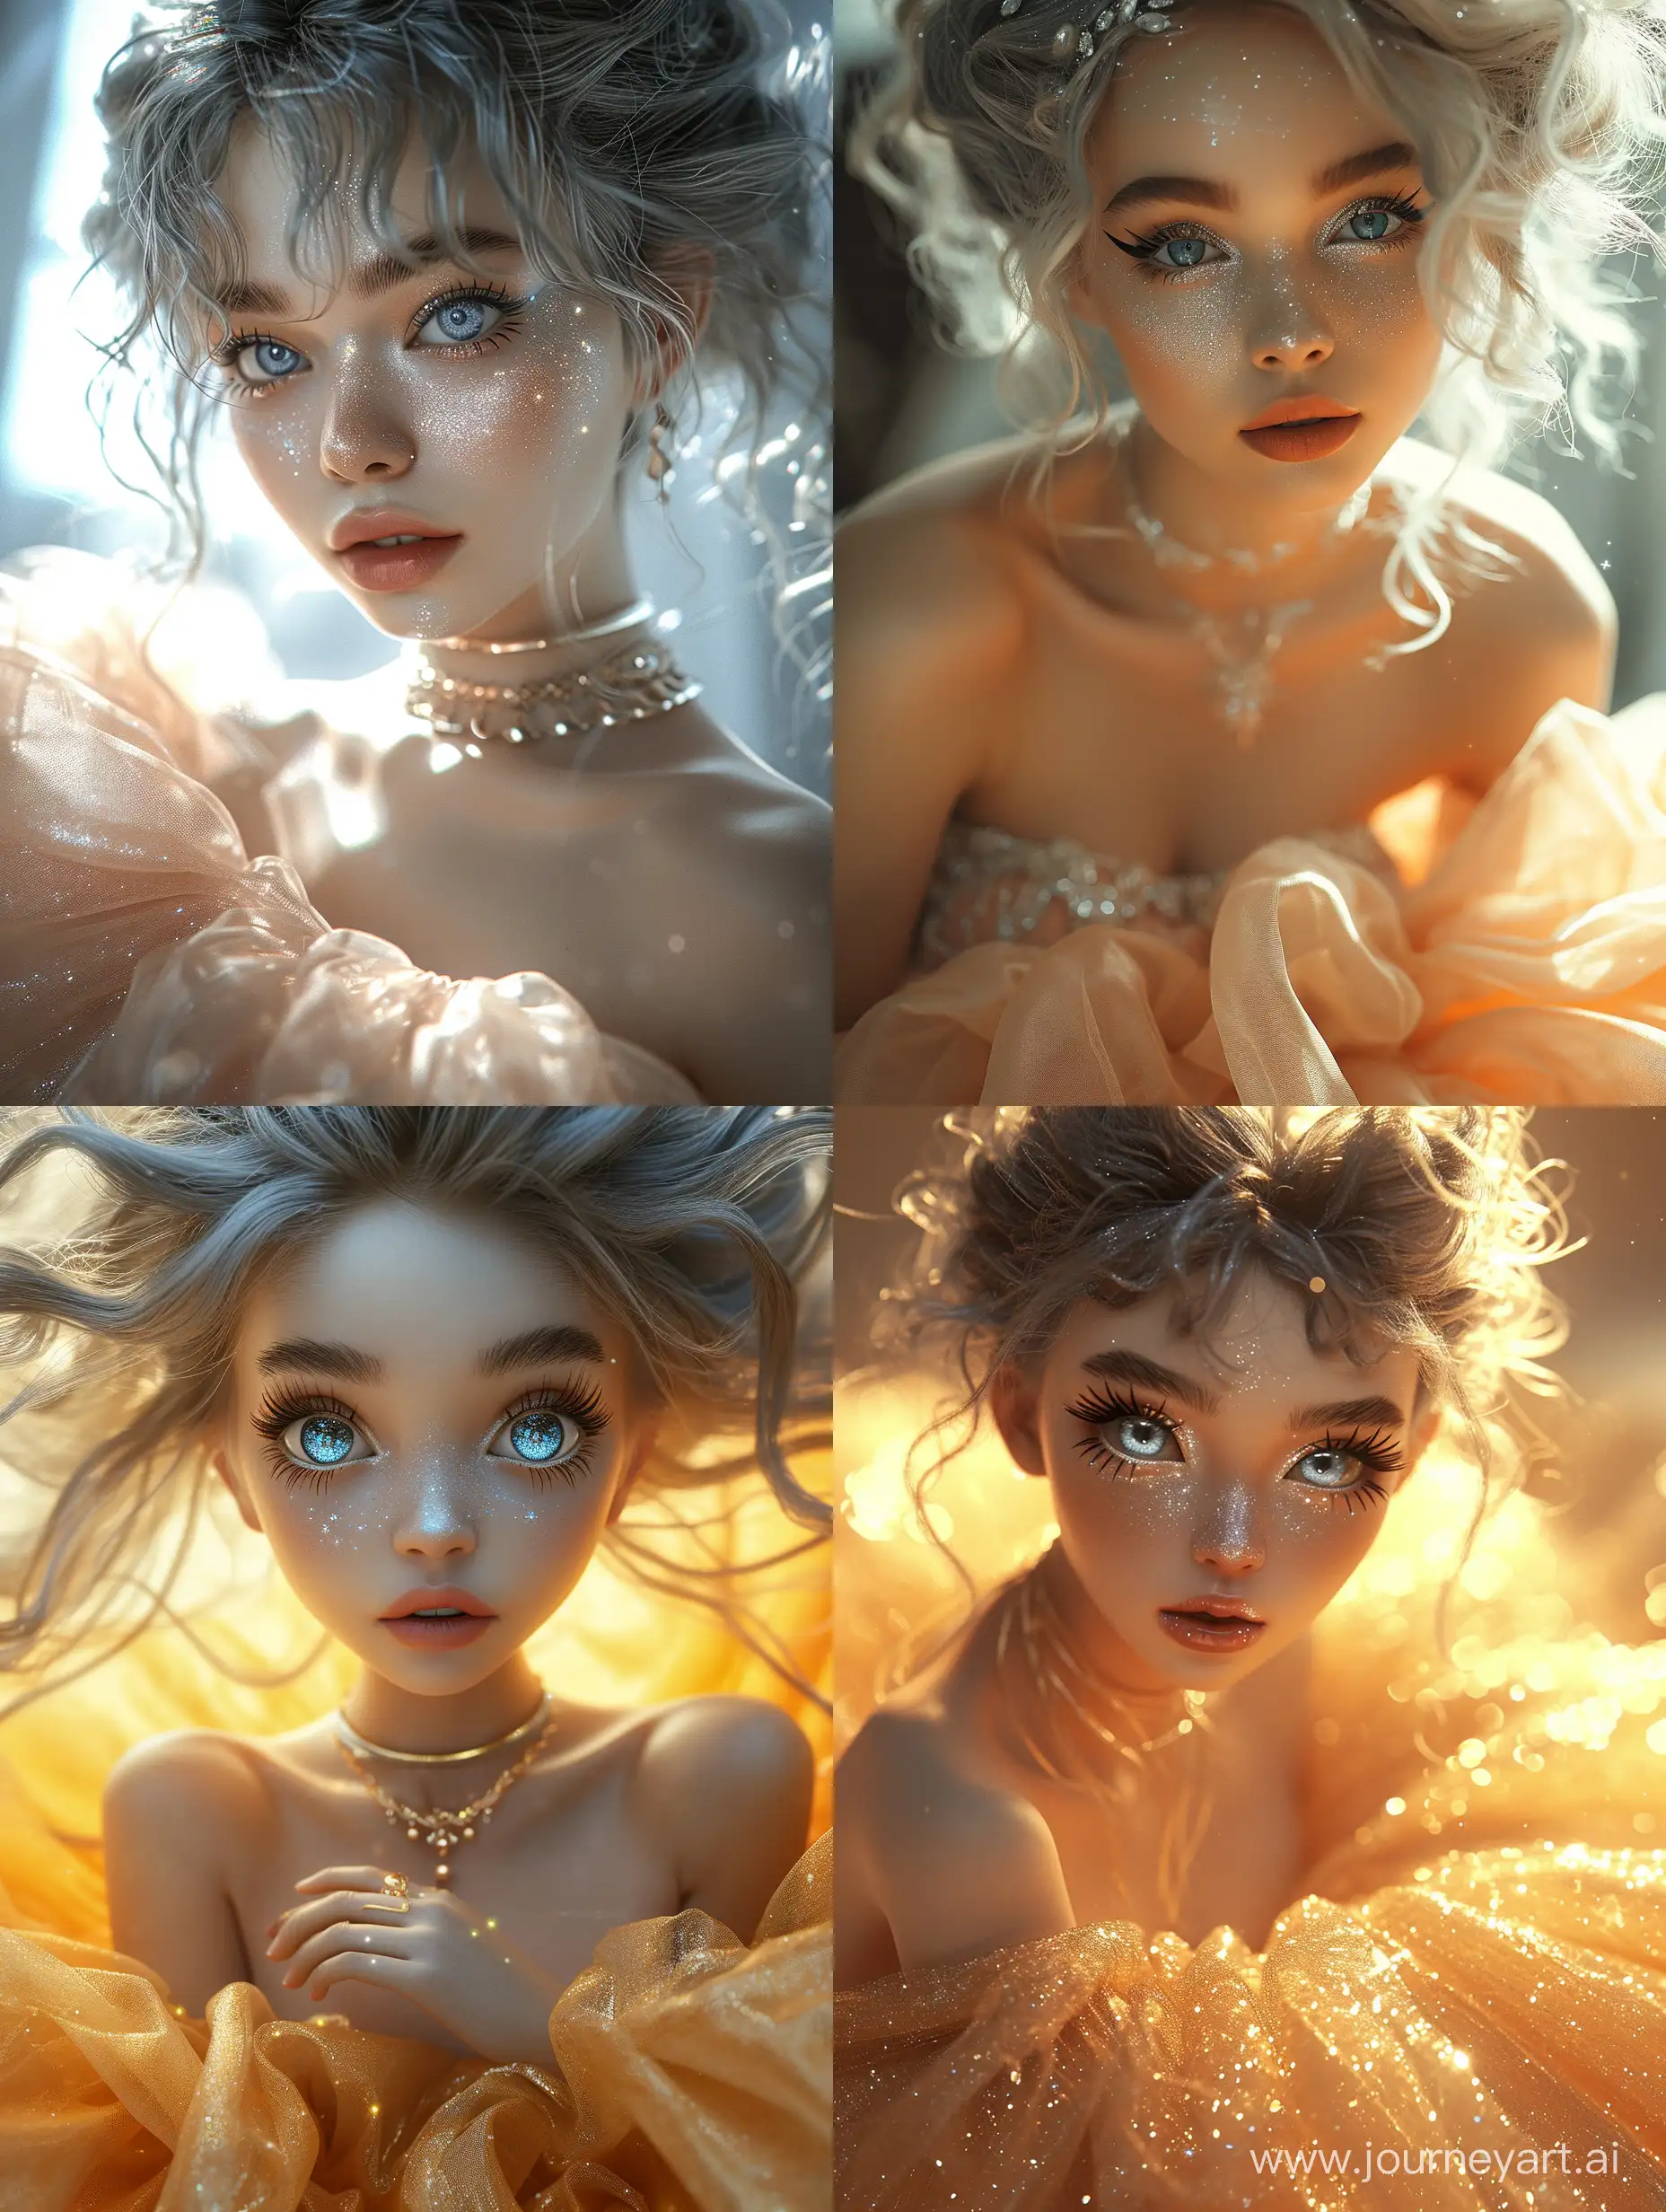 Enchanting-Portrait-with-Sparkling-Eyes-and-Fantasy-Glow